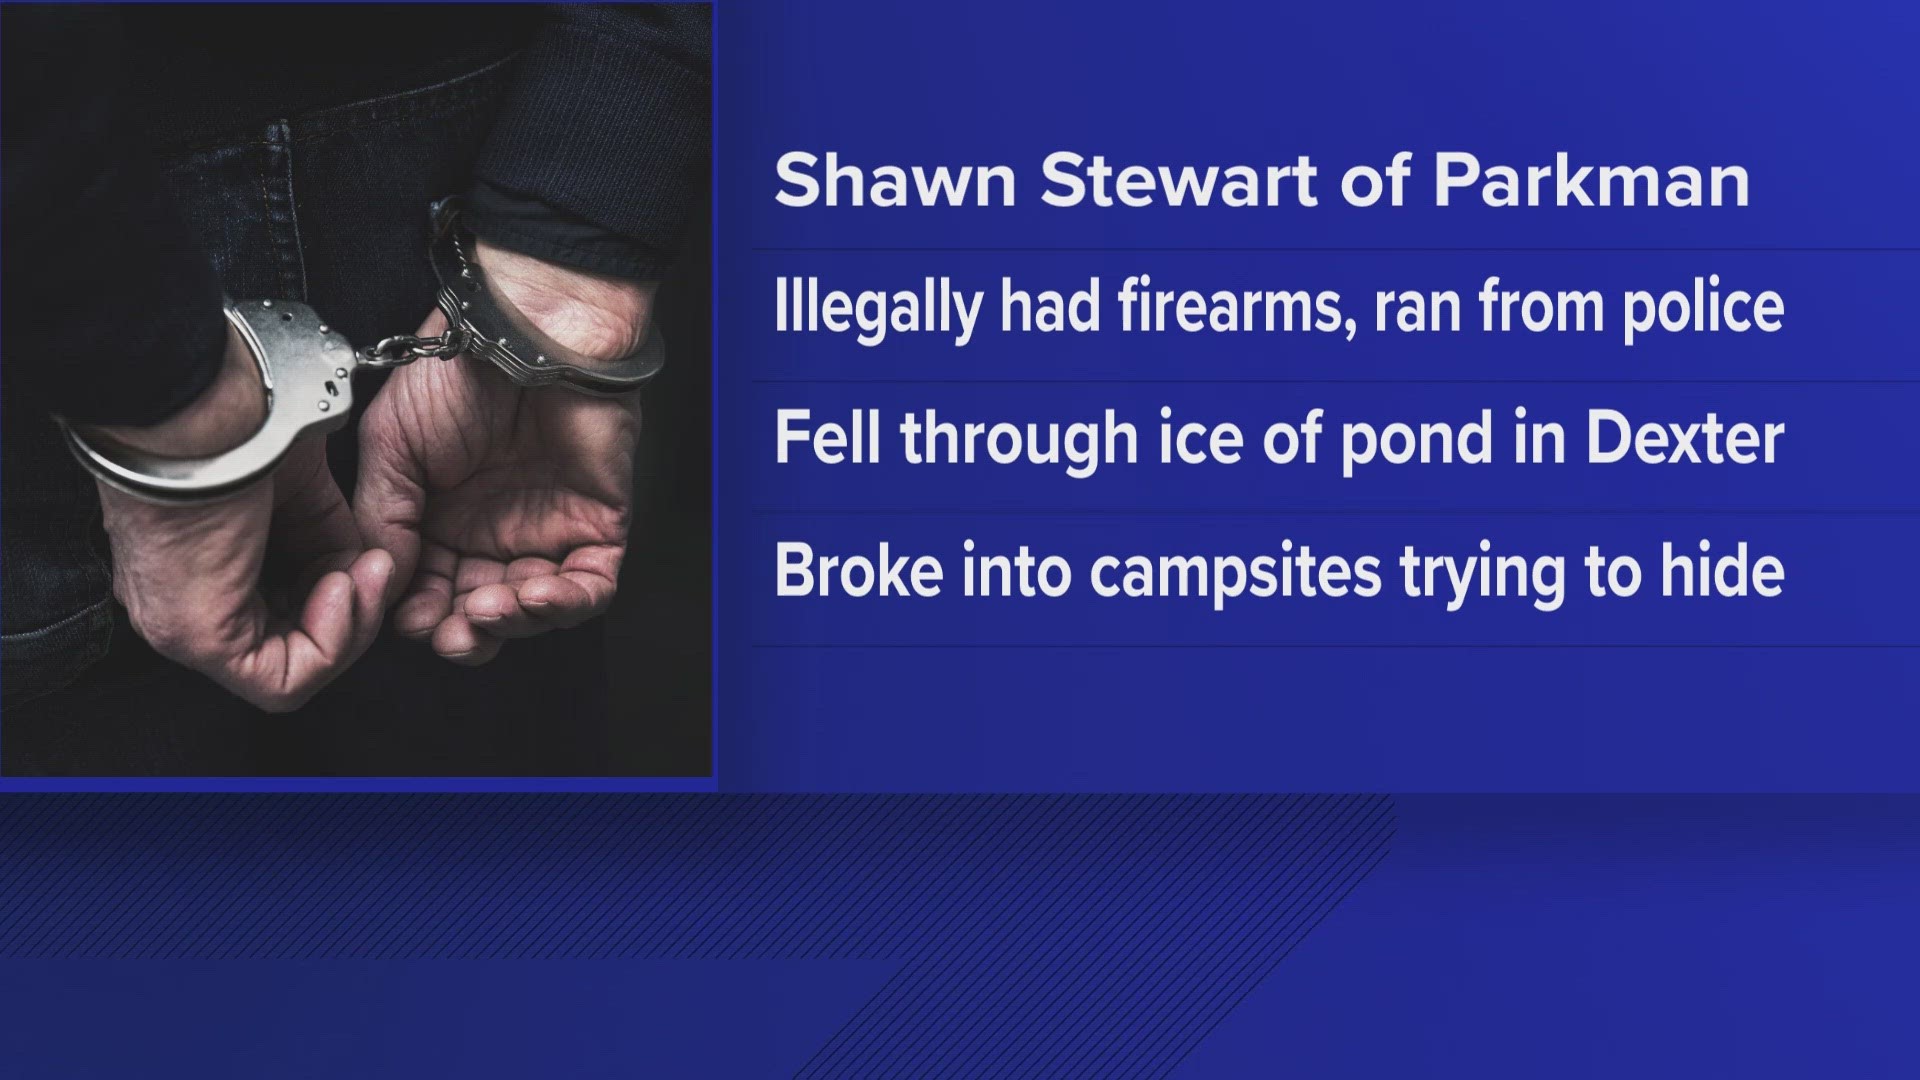 The Penobscot County Sheriff's Office said deputies arrested Shawn Stewart after he was found hiding under blankets in a camp he allegedly broke into.